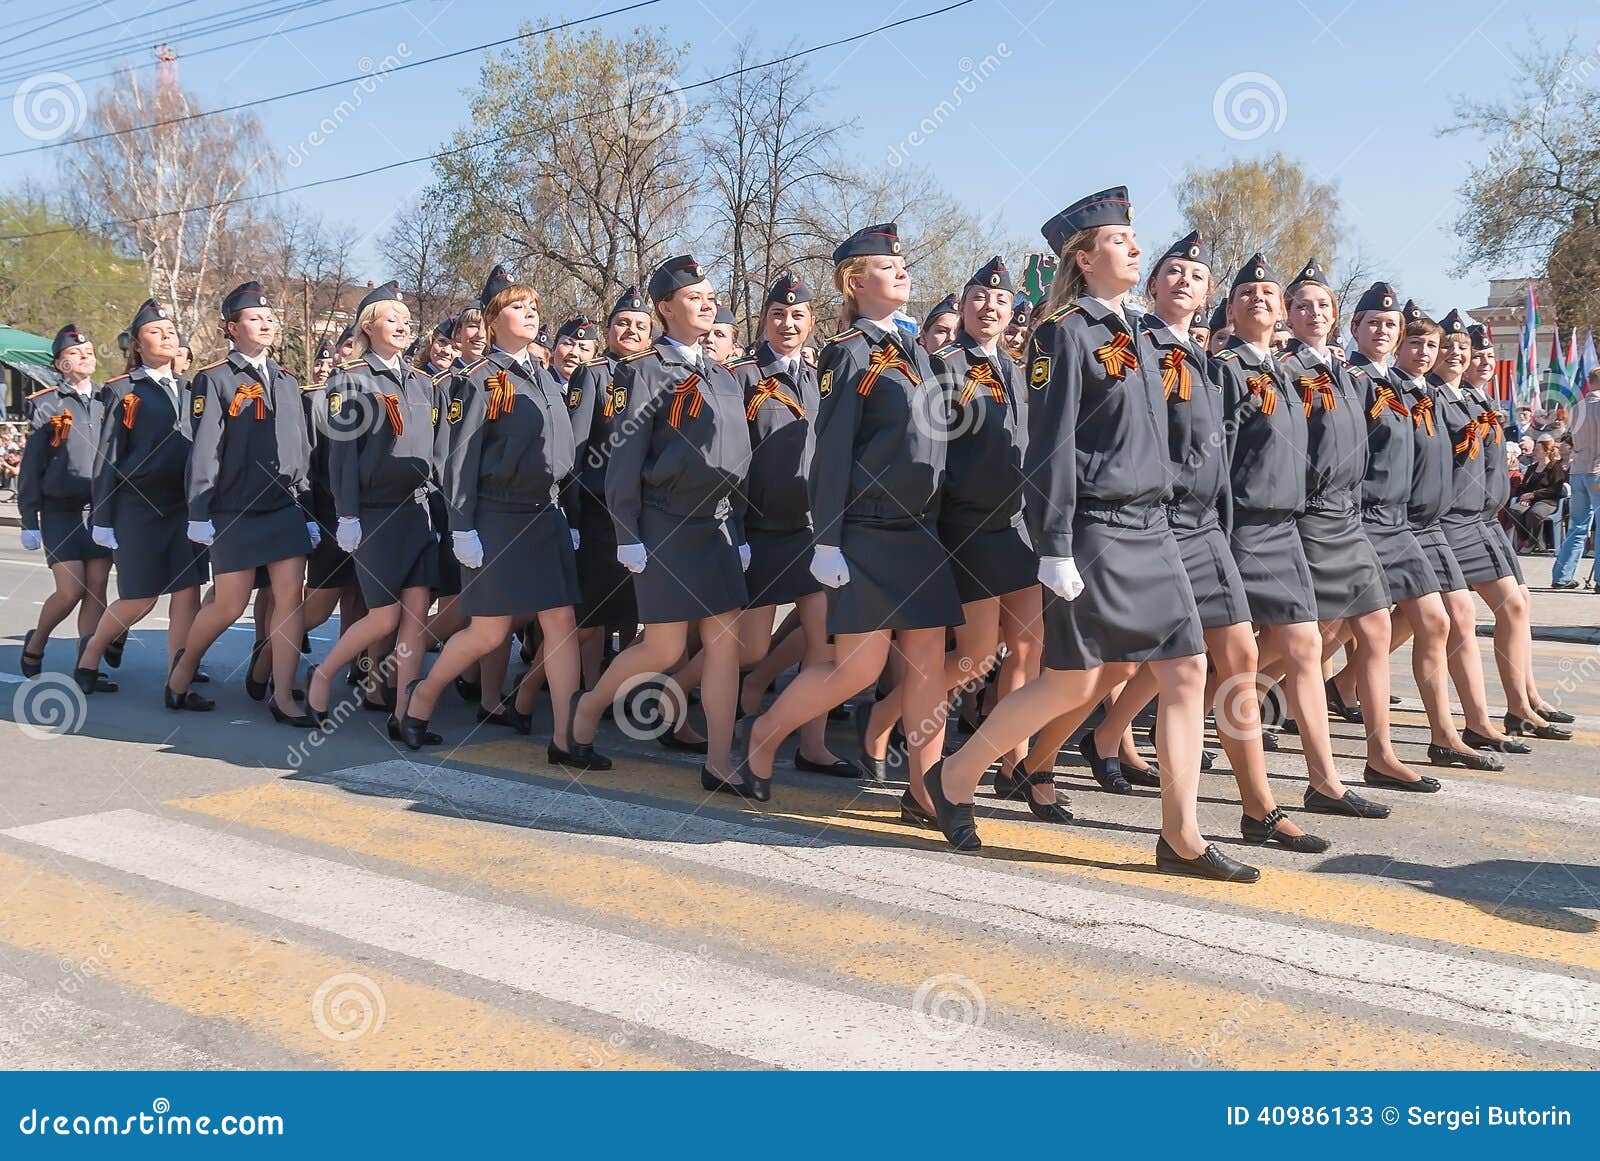 Female Cadets Of Police Academy Marching On Parade Editorial Stock